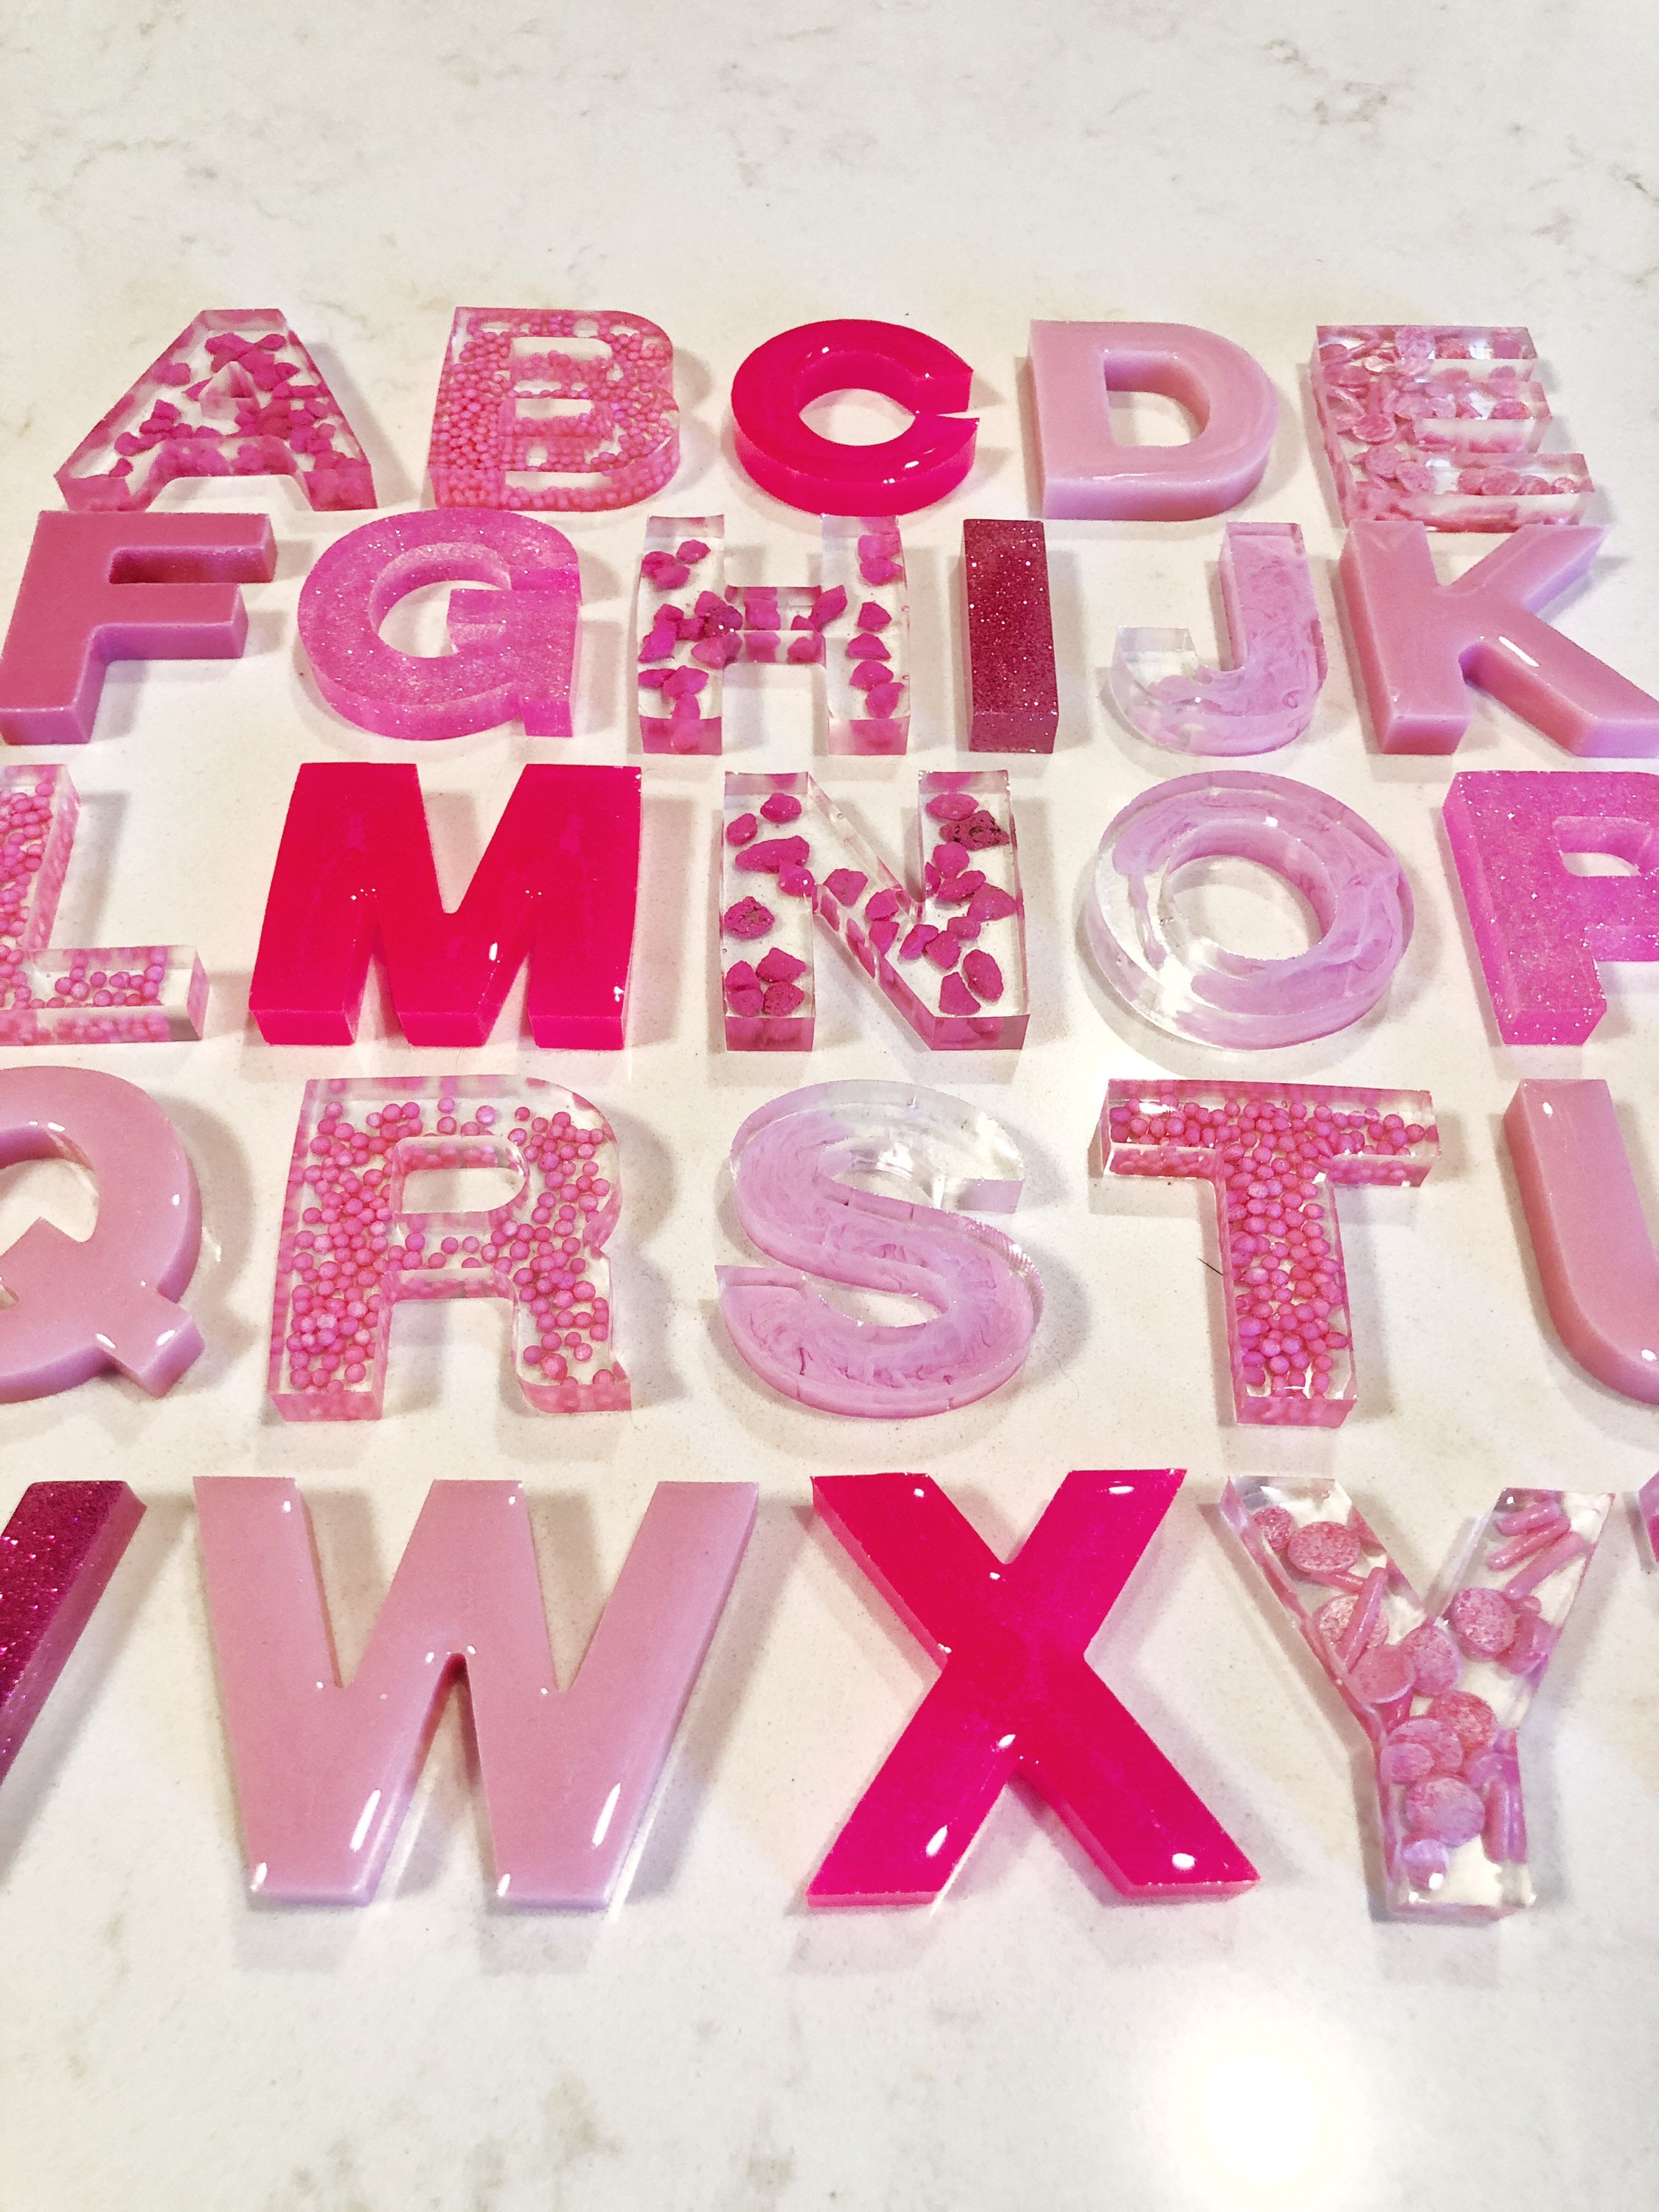 How To Make Resin Letters Without A Mold - Resin Obsession